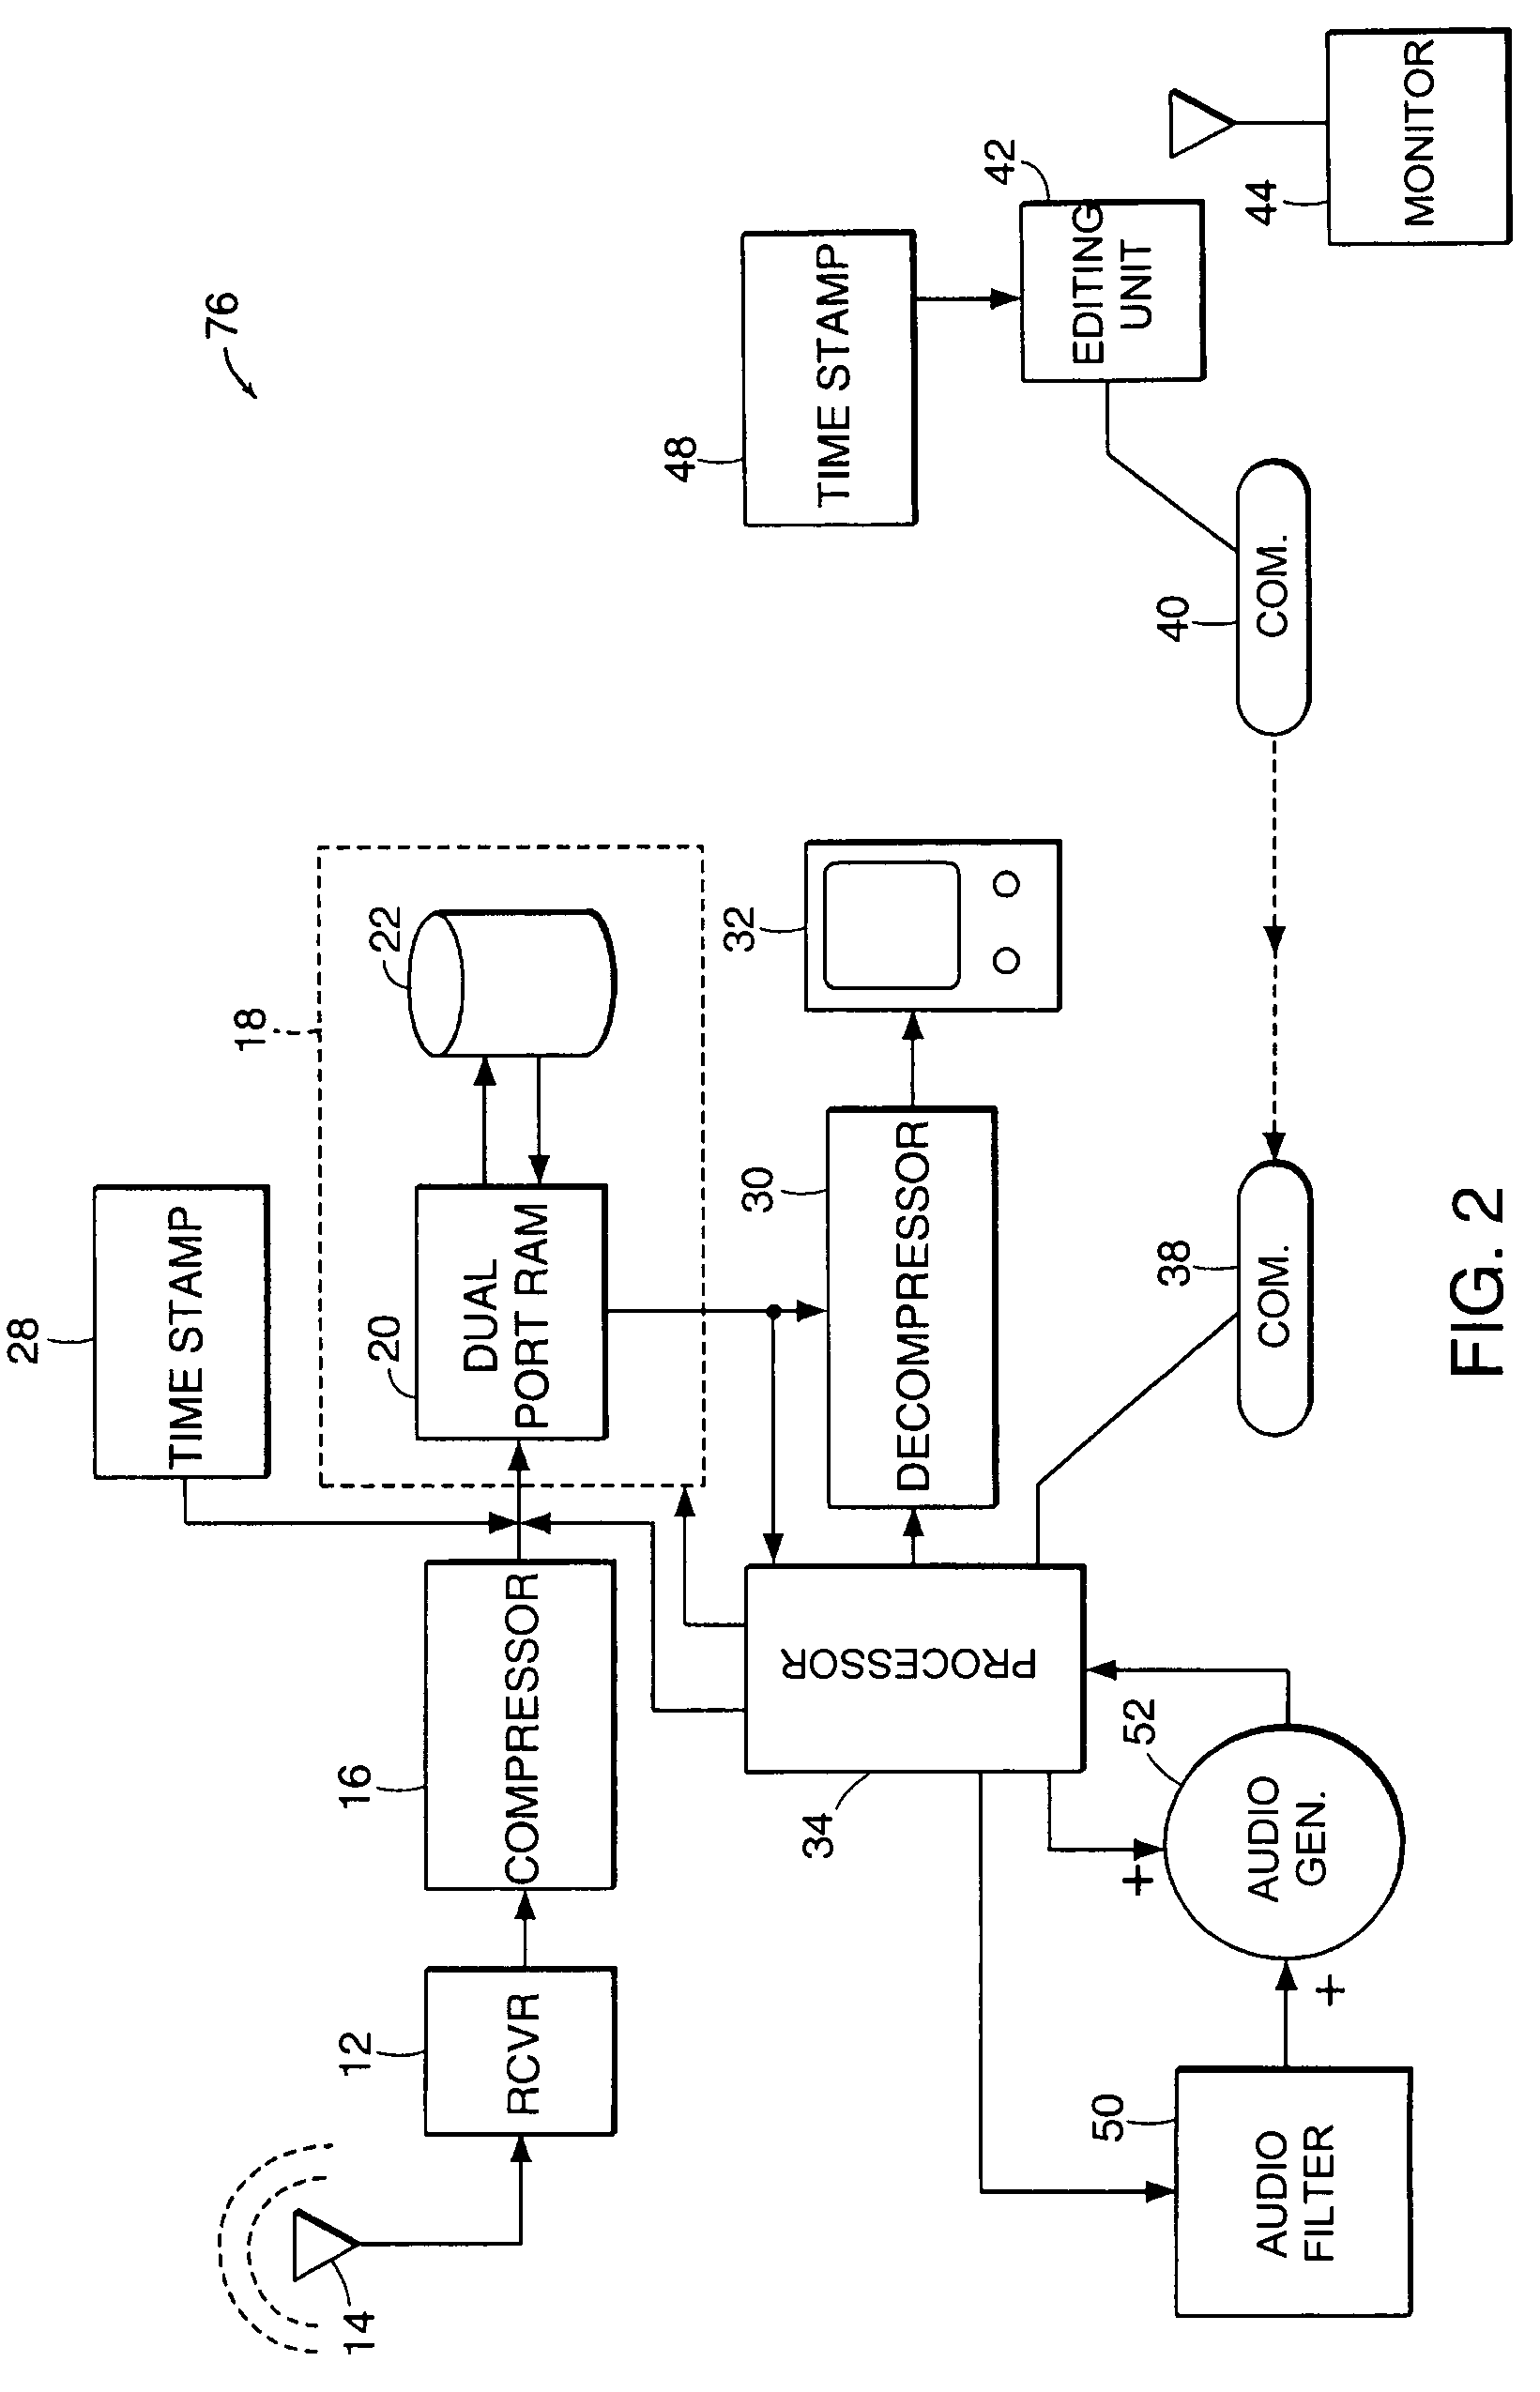 Apparatus and methods for broadcast monitoring